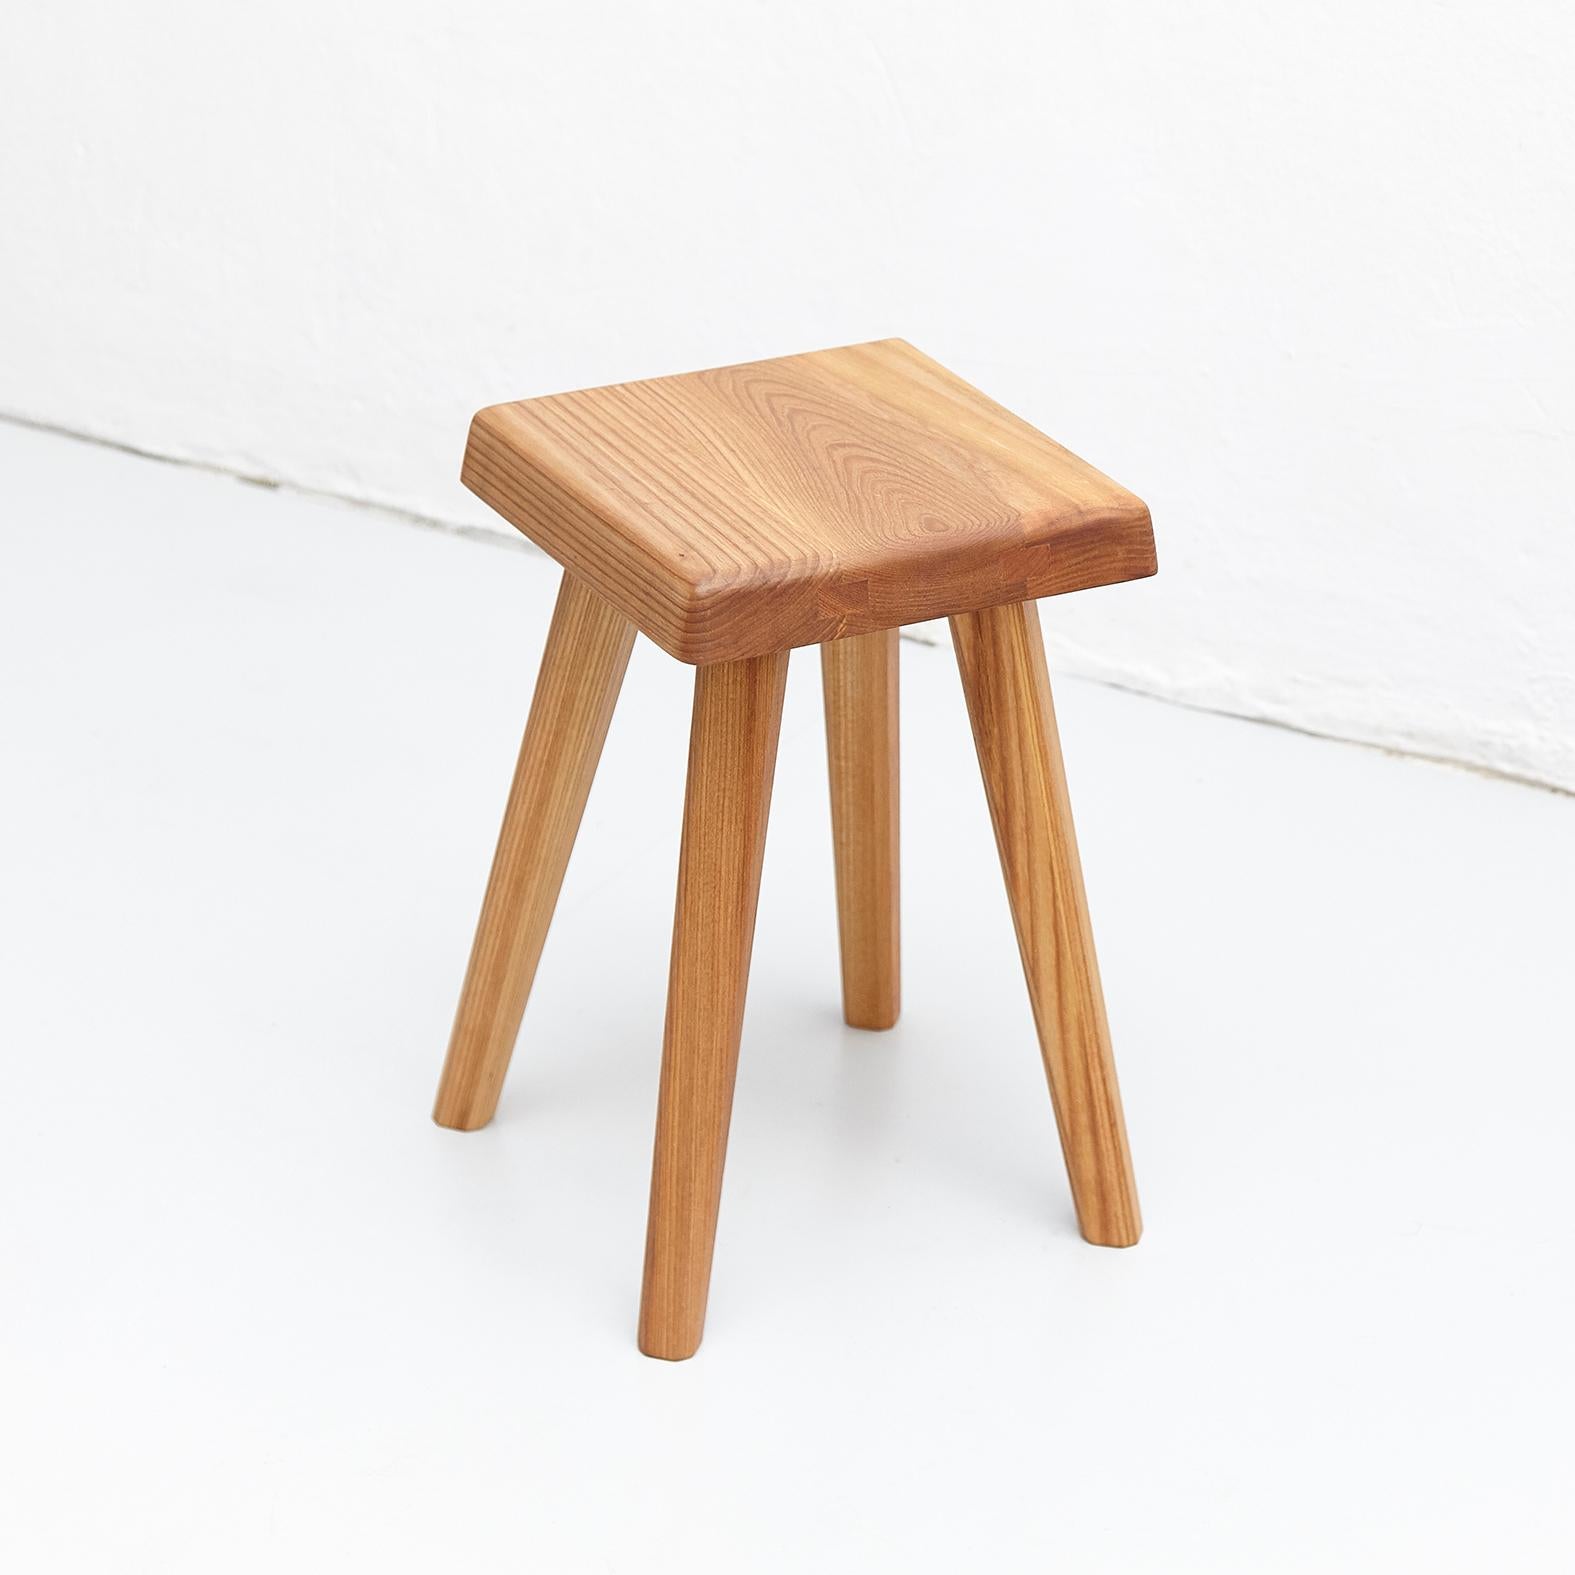 Stool designed by Pierre Chapo, manufactured in France, 2018

Solid elmwood.

In good original condition, with minor wear consistent with age and use, preserving a beautiful patina.

Pierre Chapo is born in a family of craftsmen. After his